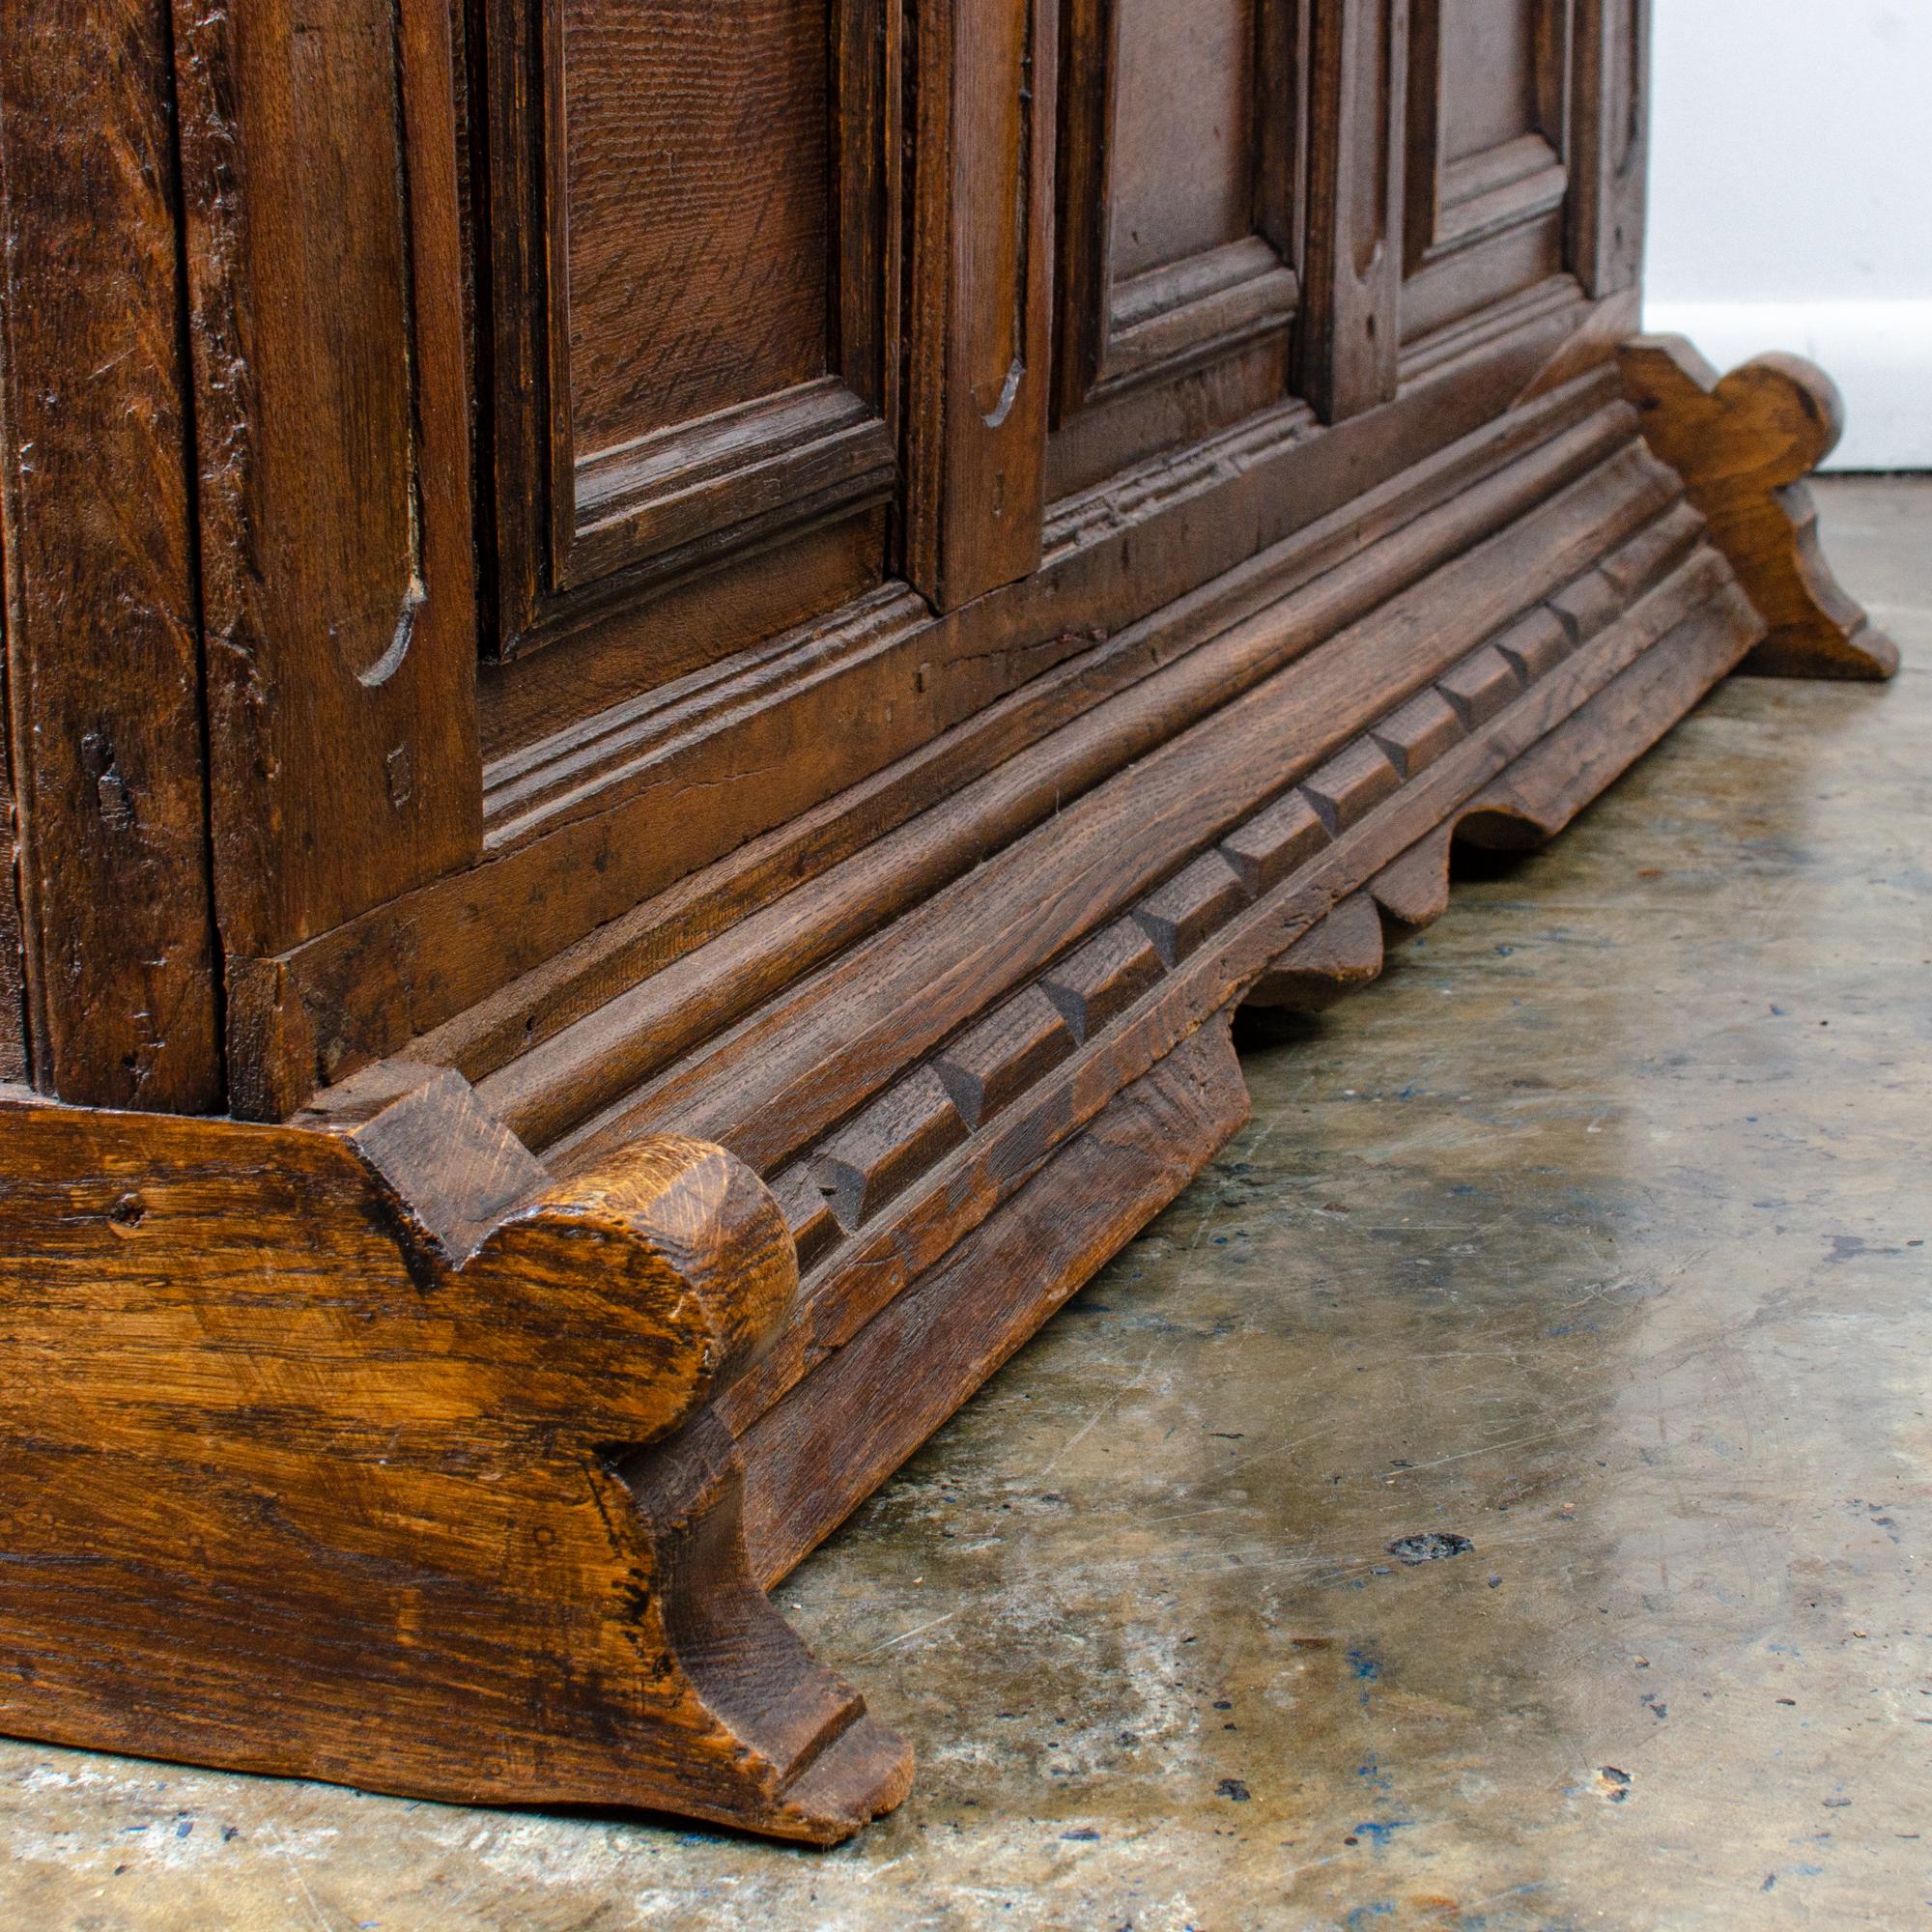 Provincial Spanish Oak Paneled Coffer, c.17th Century In Good Condition For Sale In Savannah, GA